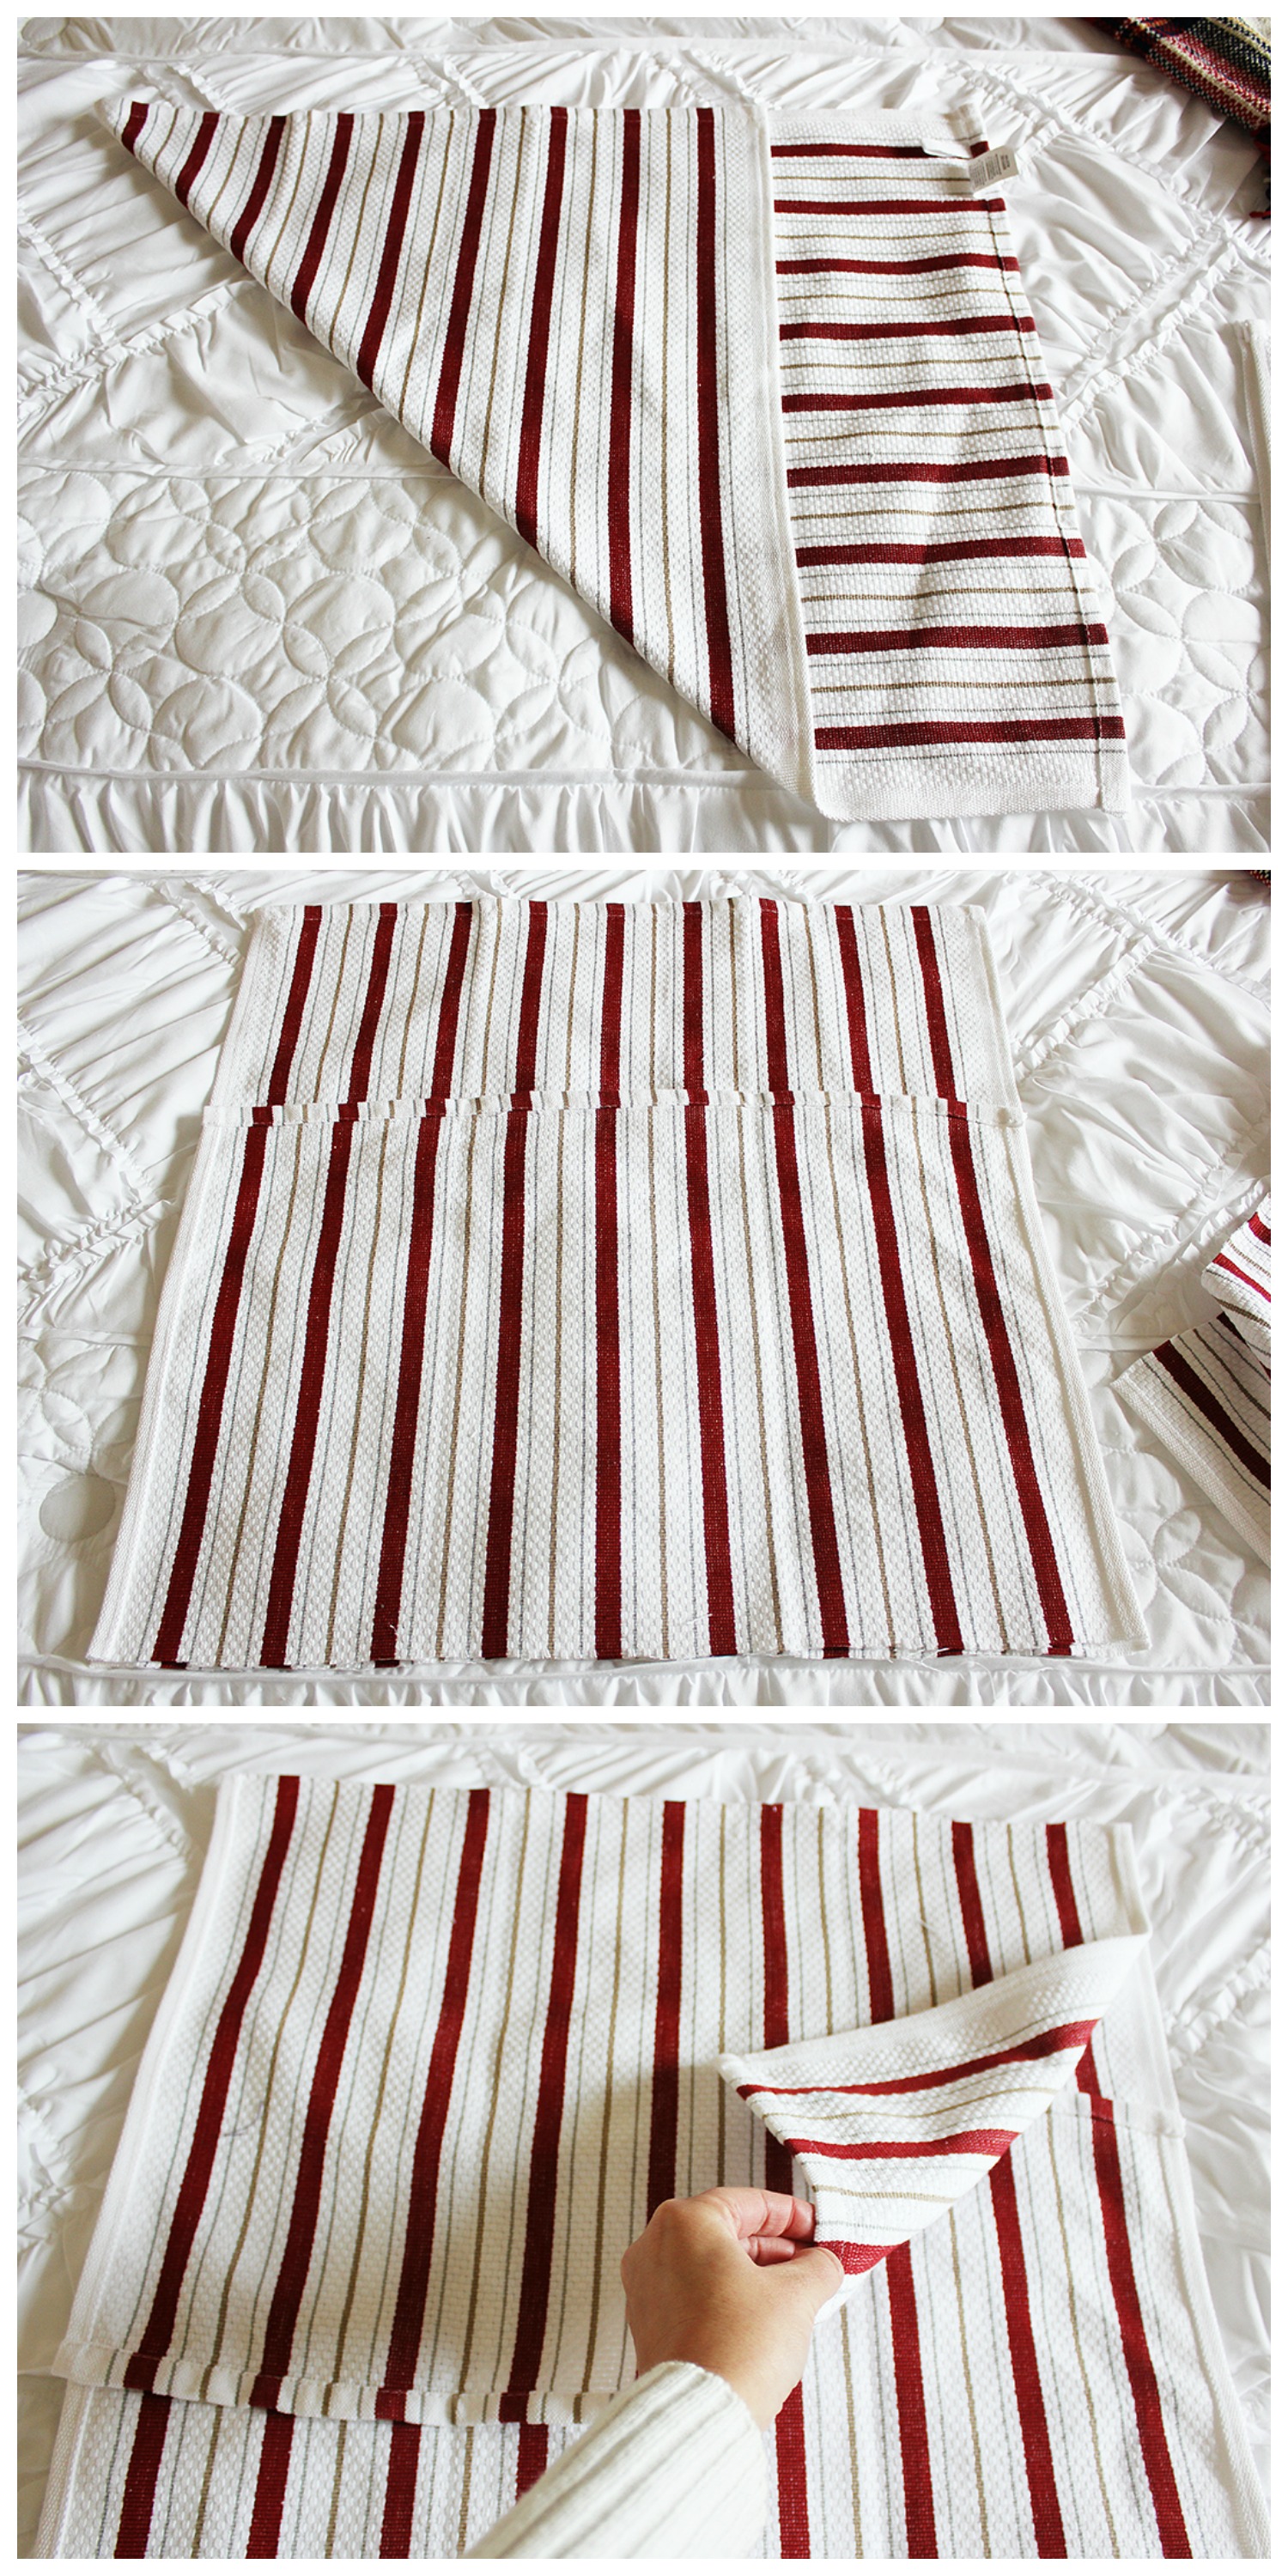 How to make a throw pillow cover from a tea towel. Smart and inexpensive! #BHGLiveBetter